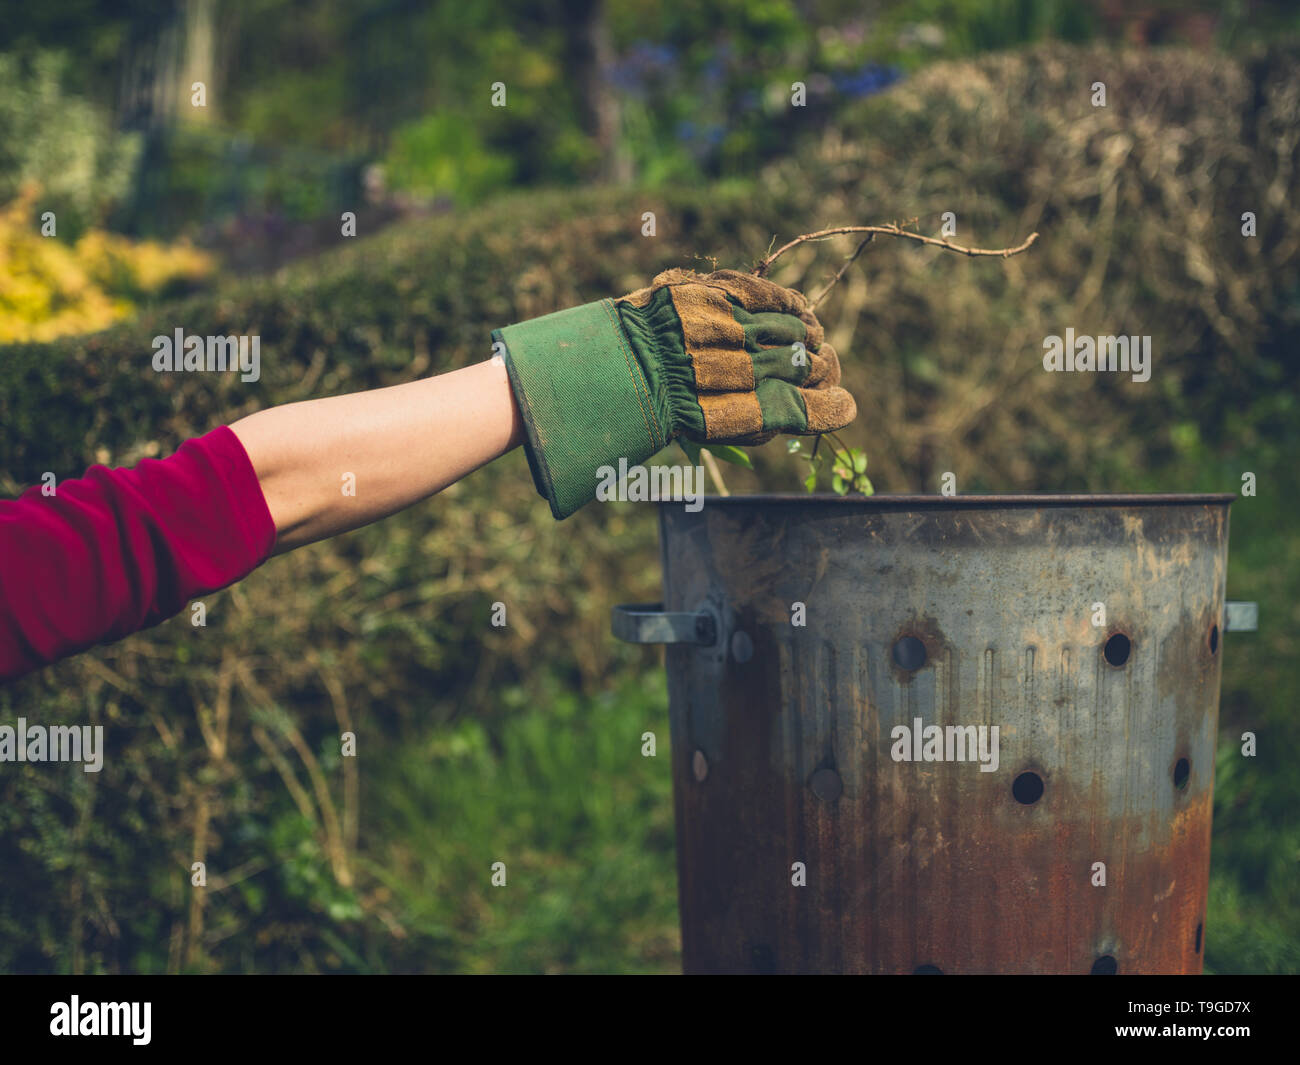 A woman wearing a gardening glove is putting weeds in an incinerator Stock Photo